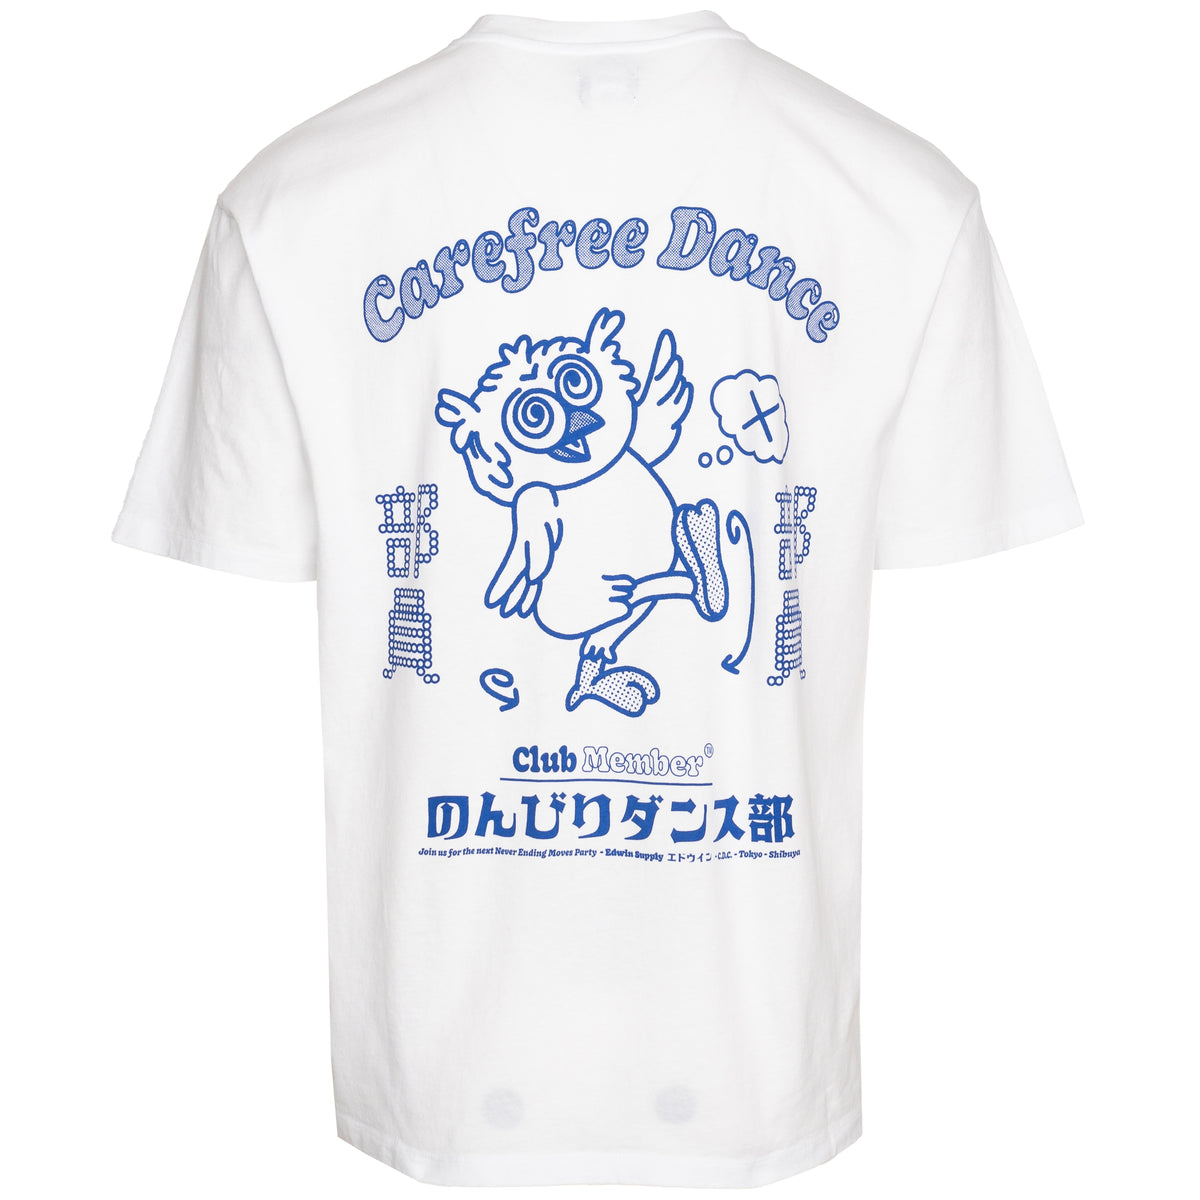 Load image into Gallery viewer, Edwin White Carefree Dance Club Tee
